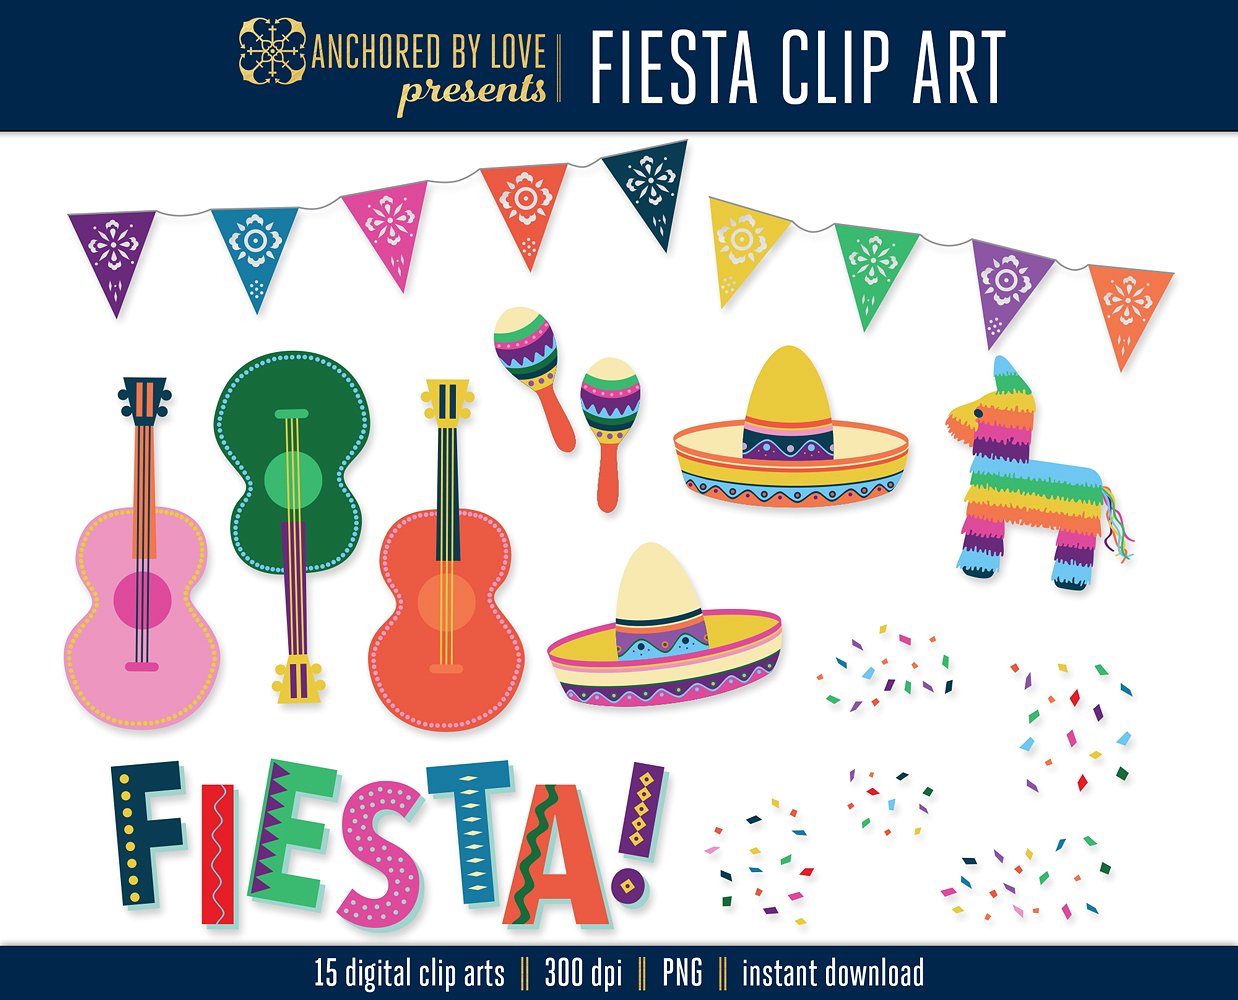 Fiesta clipart text. Free cliparts download clip